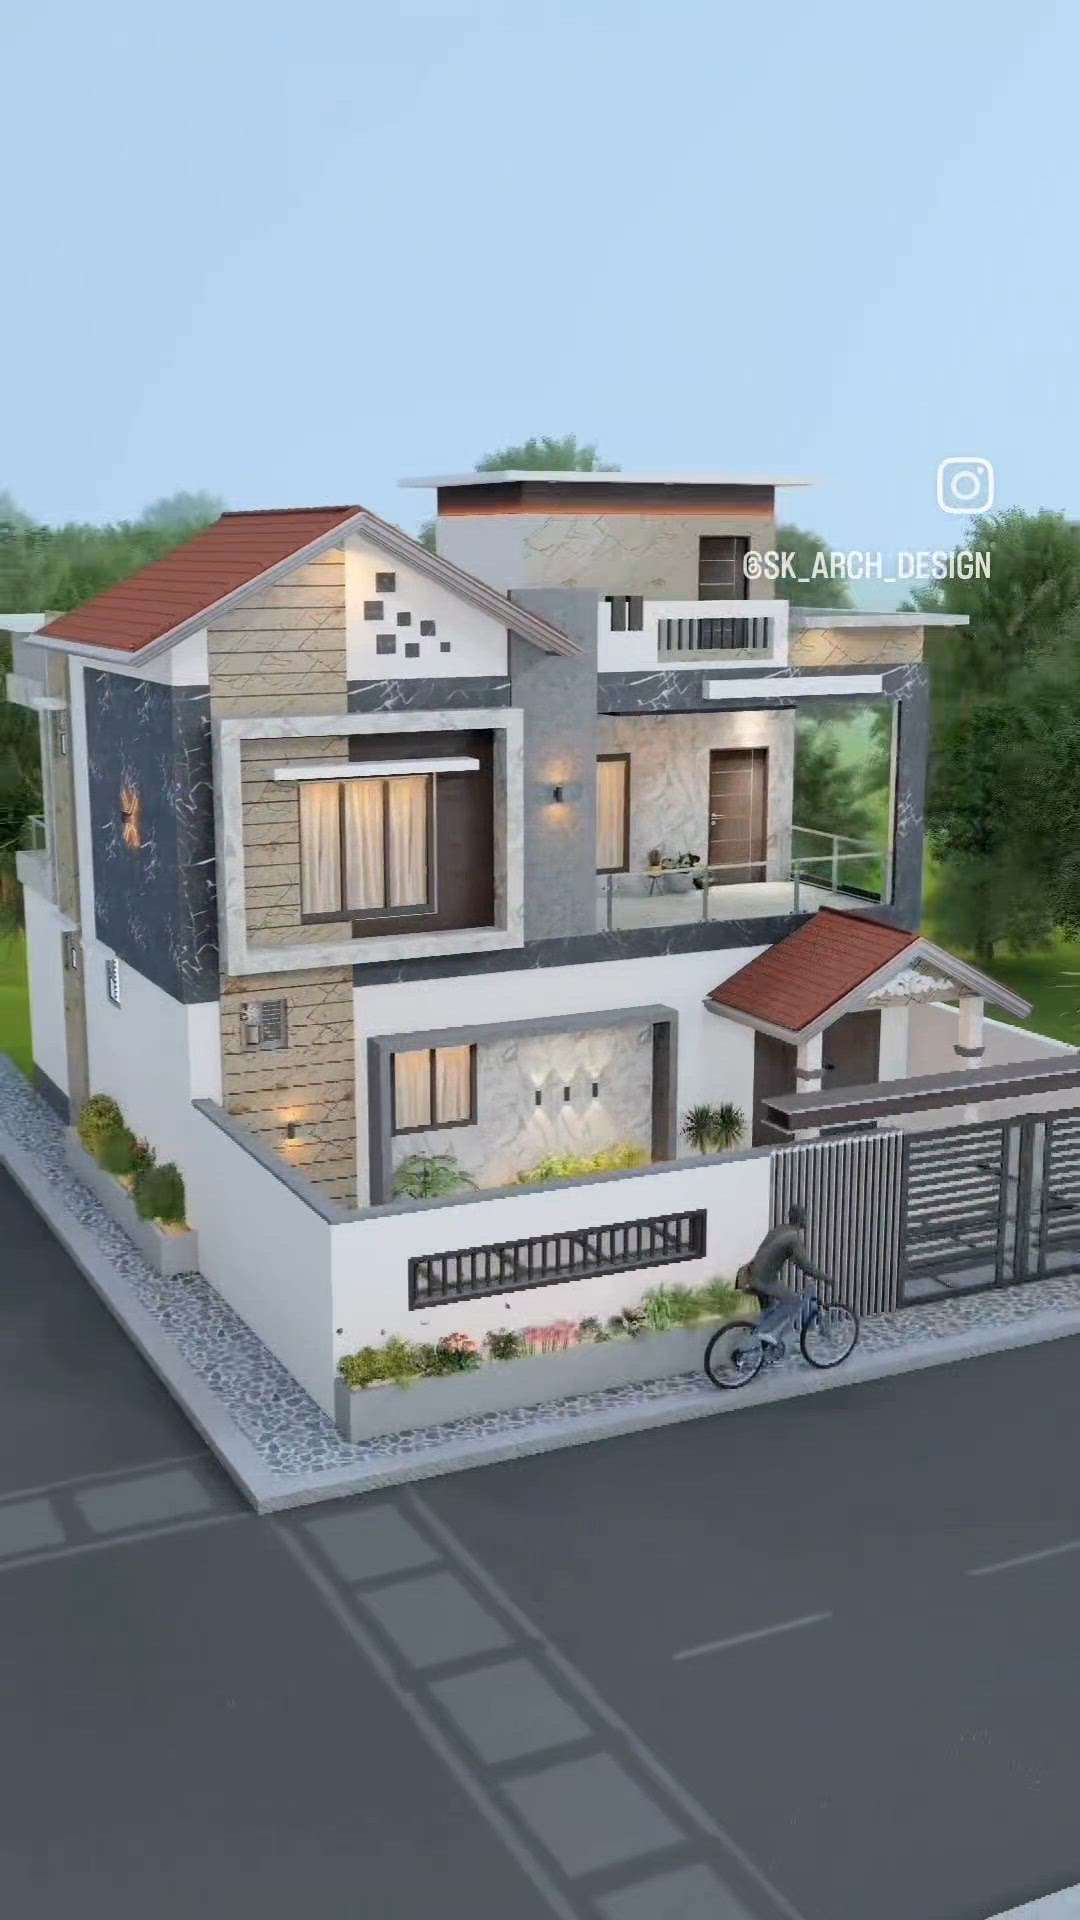 Get your dream house design contact me DM:-
@sk_arch_design
project name :- residential  building
Cliente name:- Mr. 
location :- 
.
.
Design by:- Ar. @hkumawat96 
.
.
follow :-@sk_arch_design
.
.
Note:- this is not free only pay service
For More information:-
📲call or whatsapp :- +918000810298
📧email:- skarchitects96@gmail.com
.
.
👉follow personal Instagram page:-@sk_arch_design
.
.
#homedesign #homedecoration 
#houseplaning #houseinterior 
#interiordesigner #interior #design 
#home #architecturedesign #decor
#homesweethome #interiors #decorationideas #luxury #homestyle 
#art #inspiration #interiorstyling #designer #livingroom #handmade #instahome #realstate #architect #designersarees